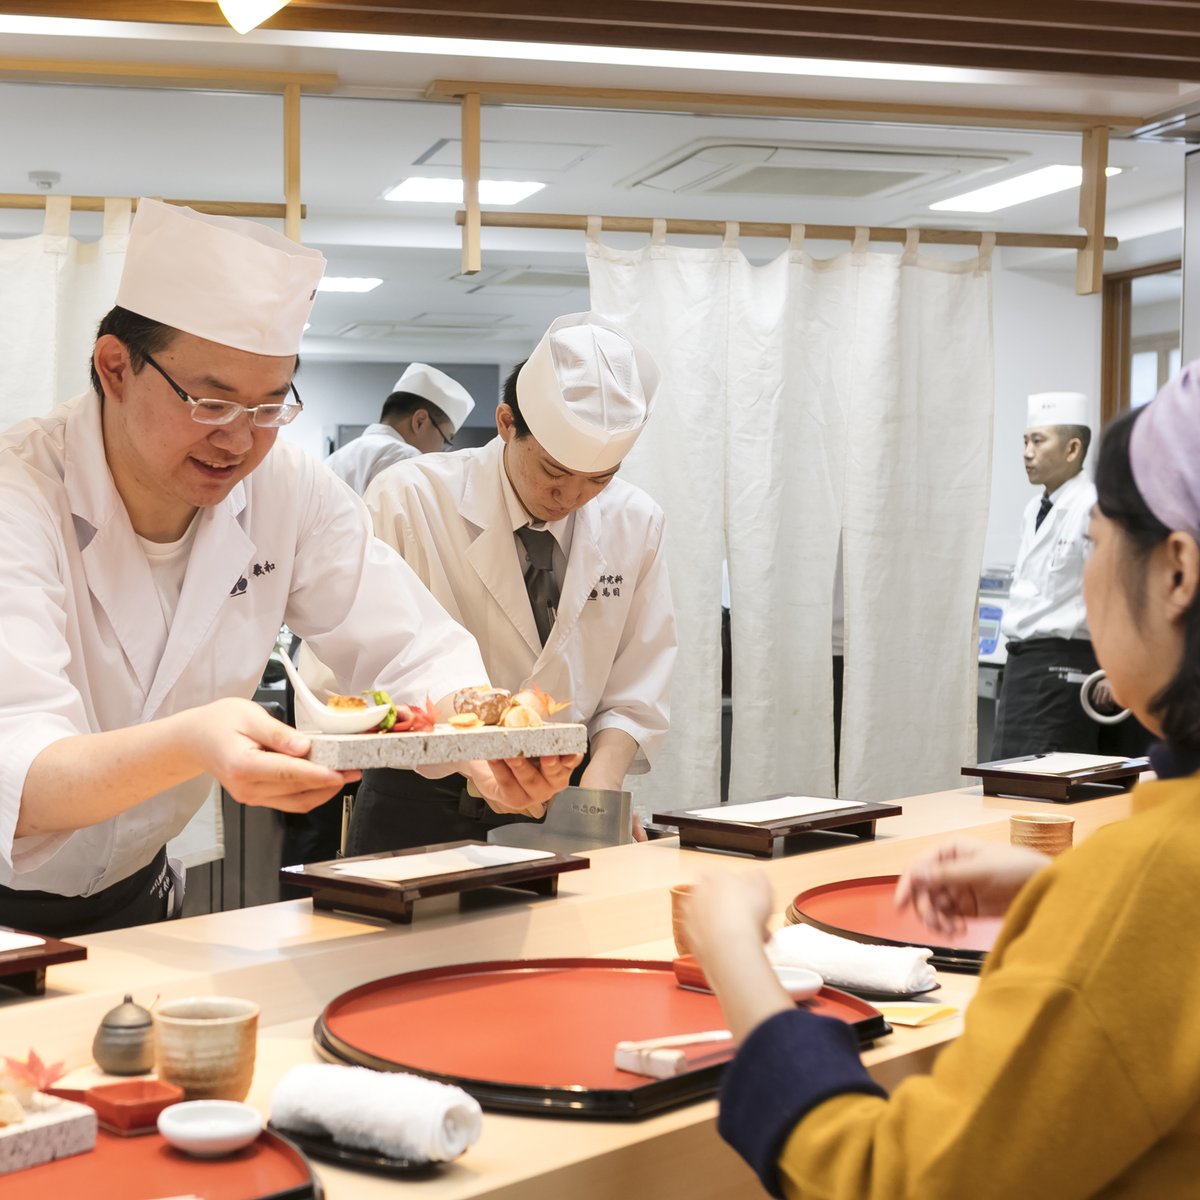 Chefs with genuine Omotenashi (Japanese hospitality) skills are highly sought after across the world, as the popularity of Japanese restaurants expands.

Learn more: ow.ly/7CeV50RqIK9